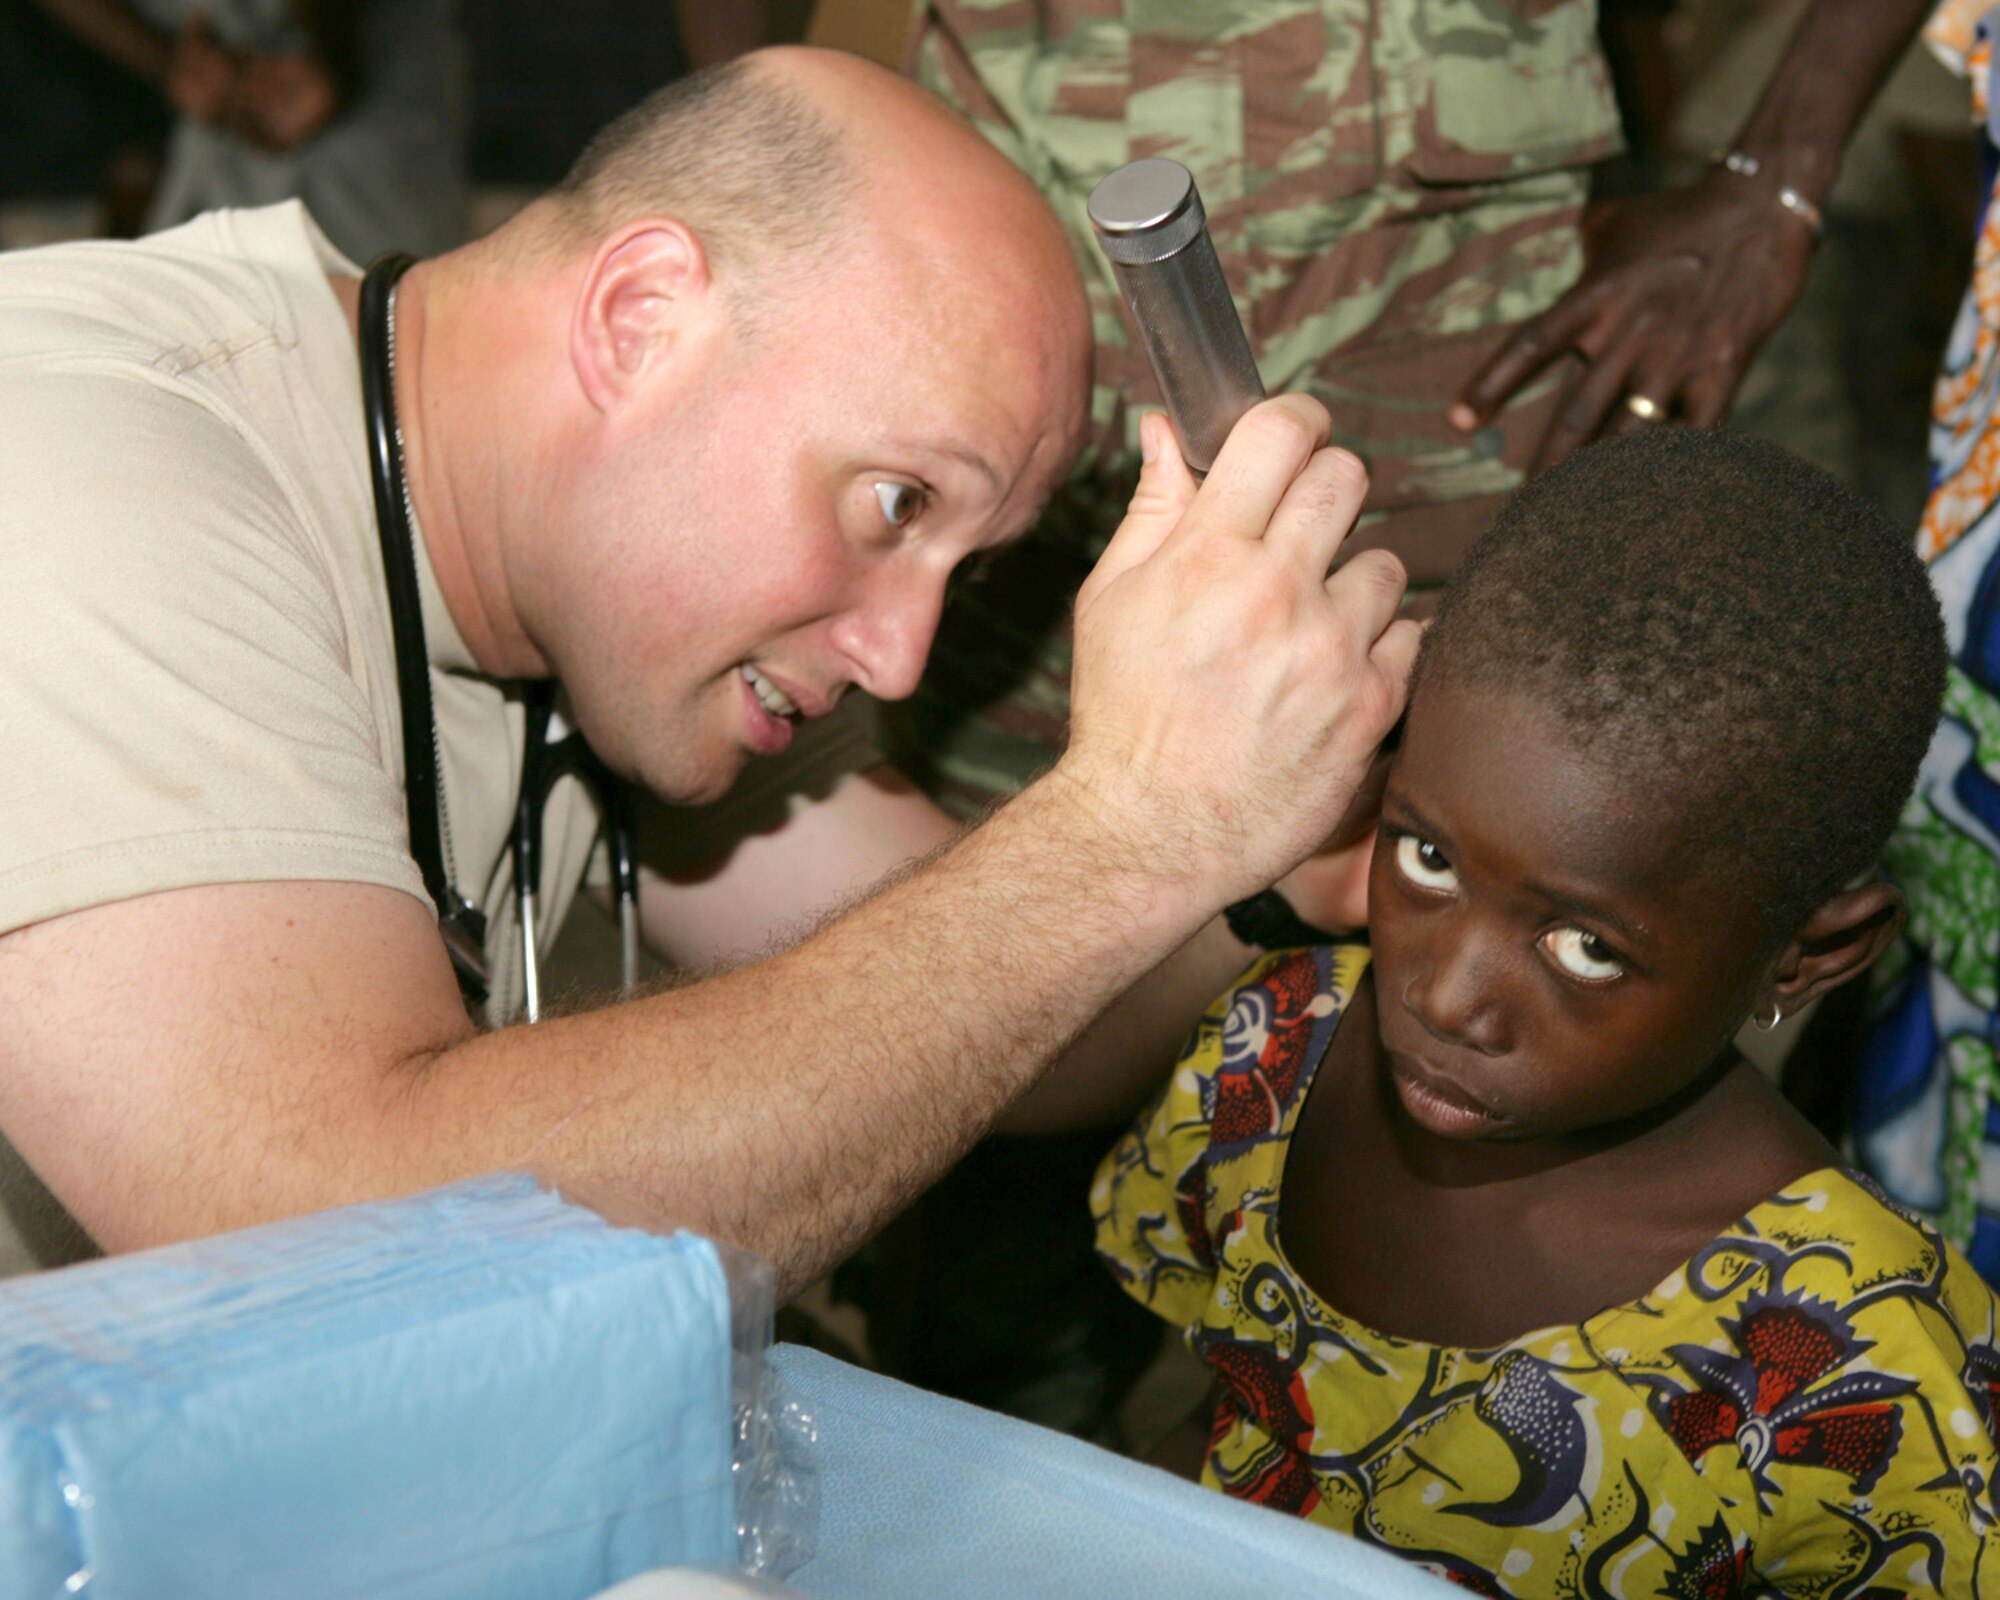 BEMBEREKE, Benin - Air Force Maj. Eric Colon, with the 459th Expeditionary Air Medical Squadron, performs a routine physical examination at Wanrarou, Benin, local during day one of a six-day Medical Civil Assistance Program coordinated by the 459th EAMDS and three Benin Army doctors. The 459th is a provisional part of the 404th Air Expeditionary Group at 17th Air Force. 
The program is part of Exercise SHARED ACCORD 09, a scheduled, 15-day bilateral Benin-U.S. exercise. Also know as Air Forces Africa, 17th coordinated the air component participation and contribution to the exercise. The exercise is scheduled to conclude June 25, 2009. (Photo by U.S. Marine Cpl. Lydia M. Davey)